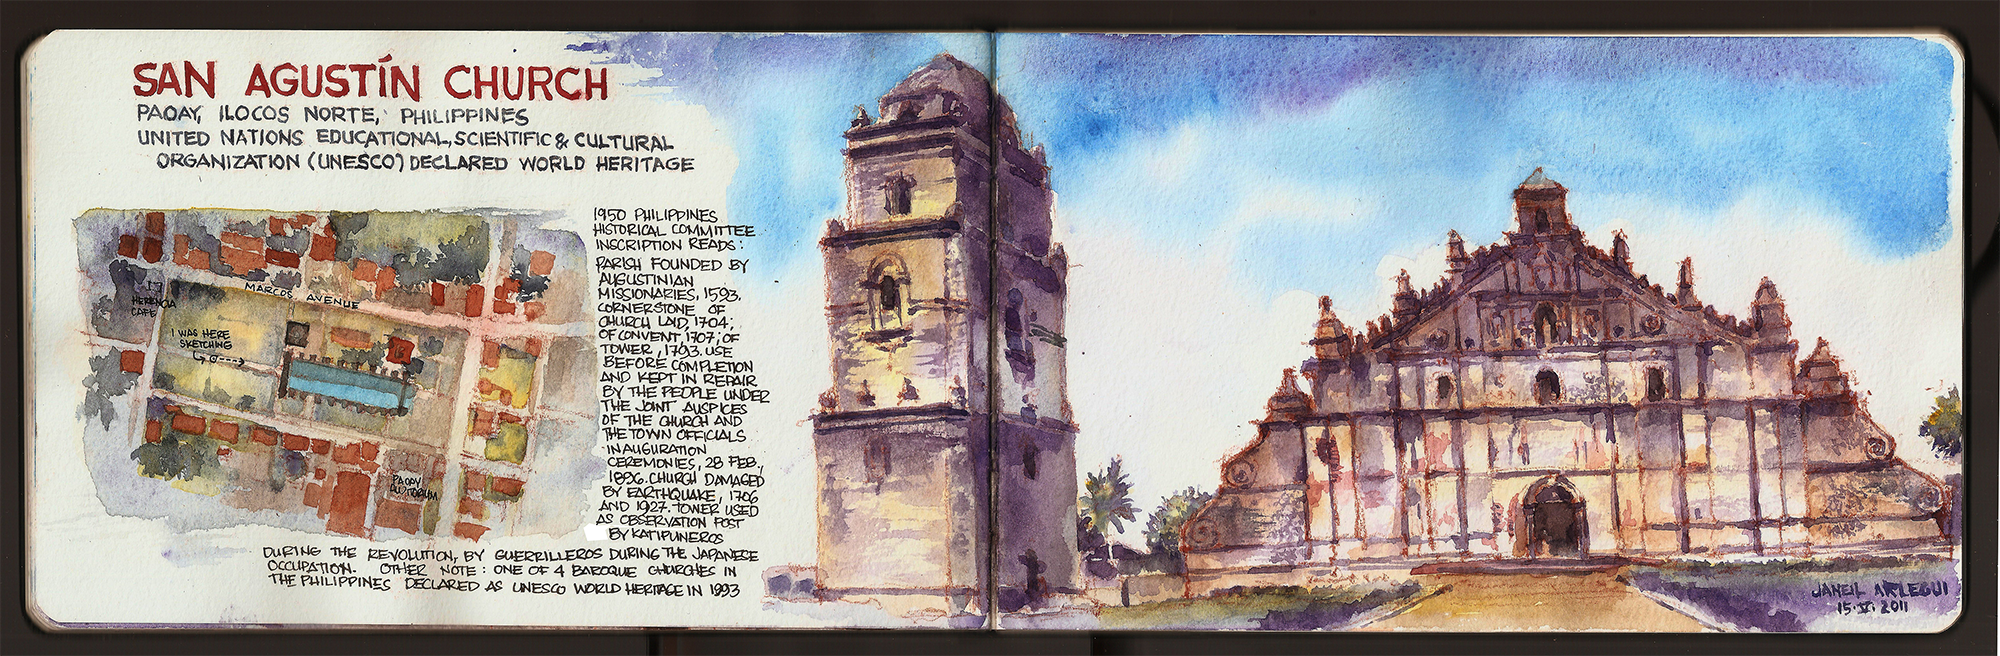 The World Heritage Site of Paoay Church, Philippines